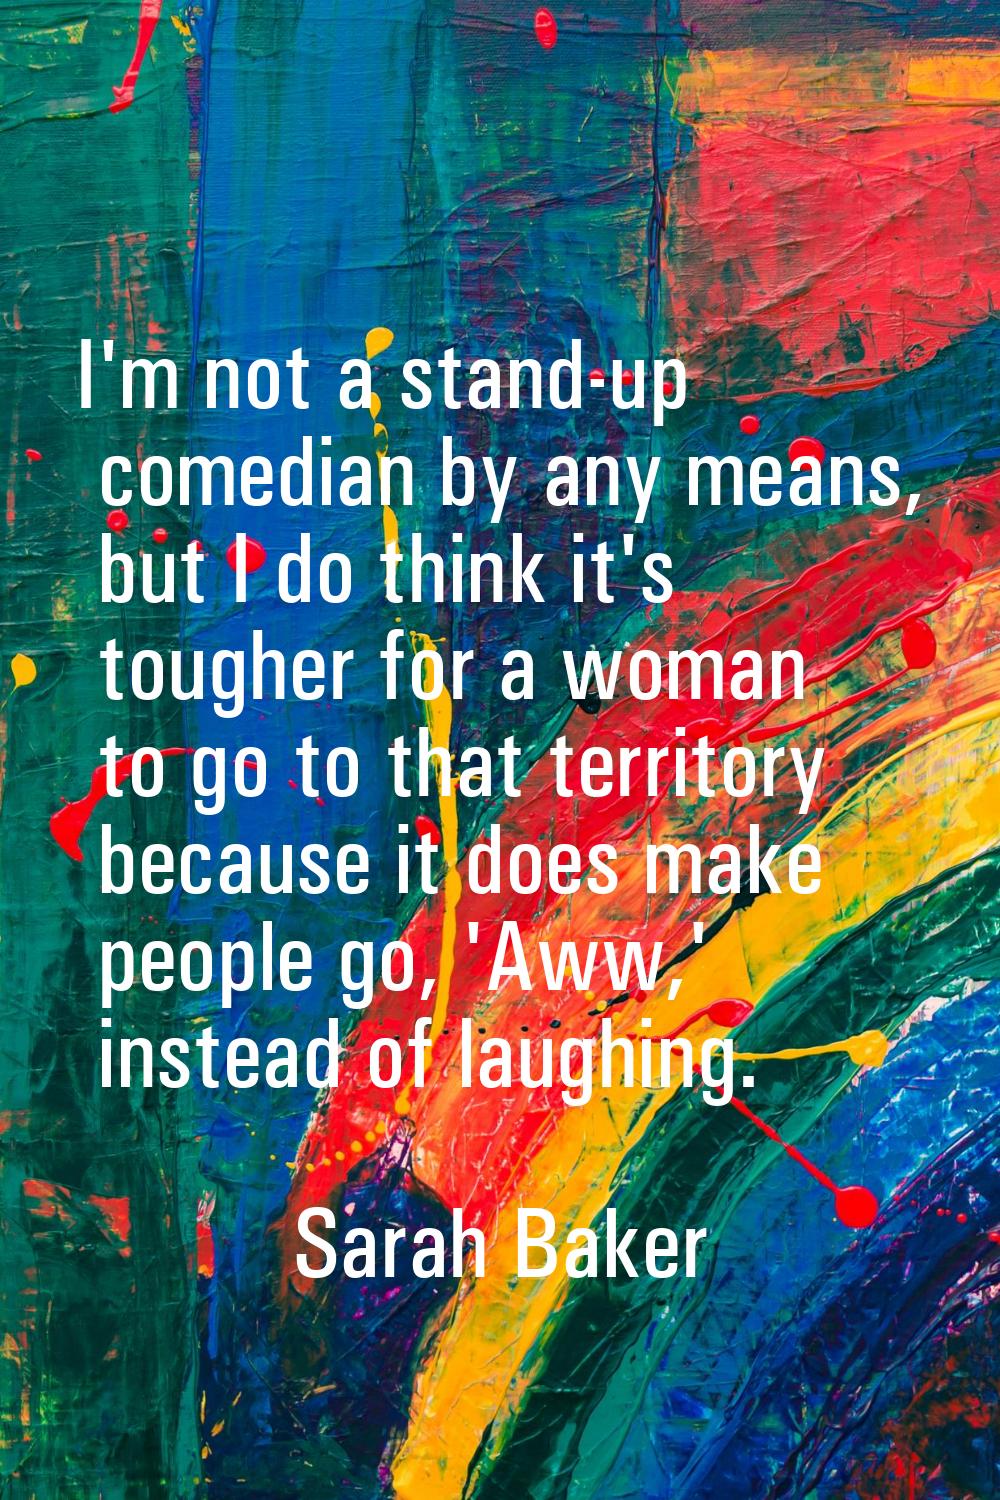 I'm not a stand-up comedian by any means, but I do think it's tougher for a woman to go to that ter